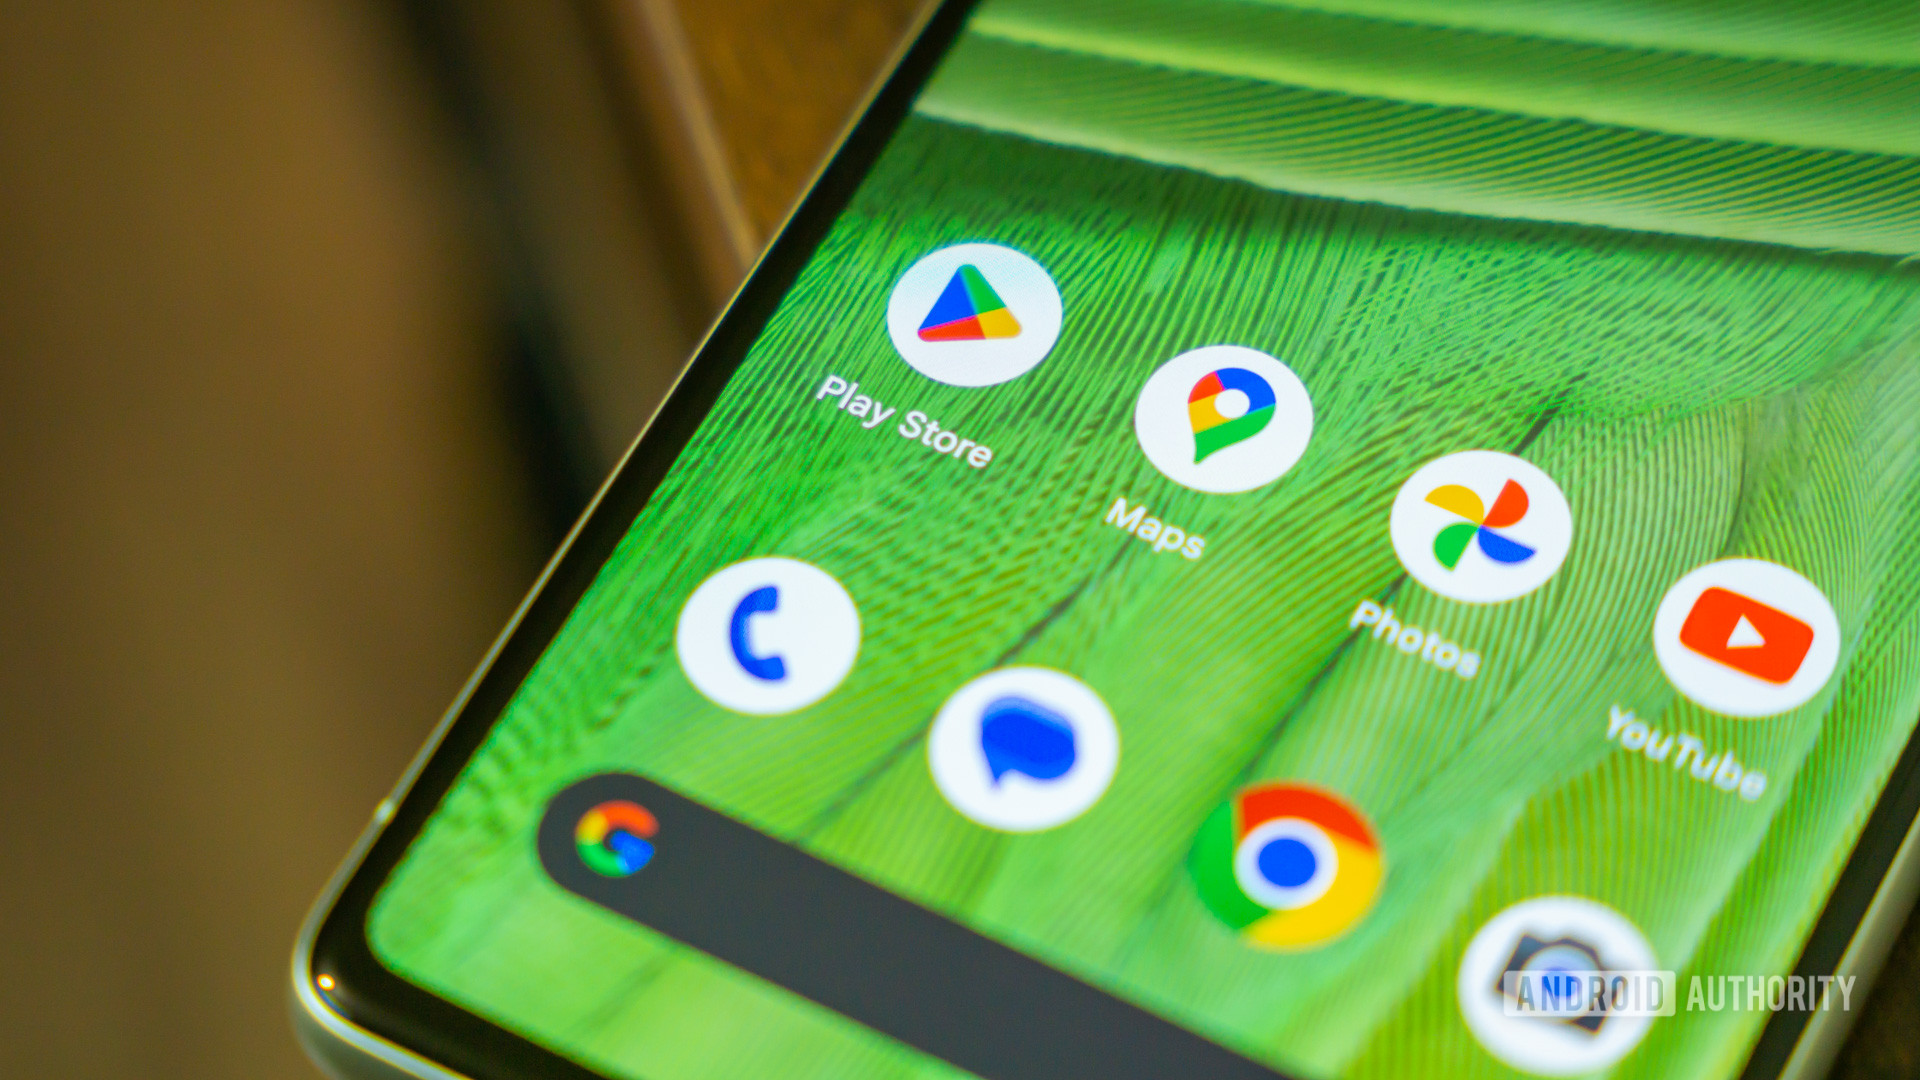 Google Play Store app next to other Google Apps stock photo